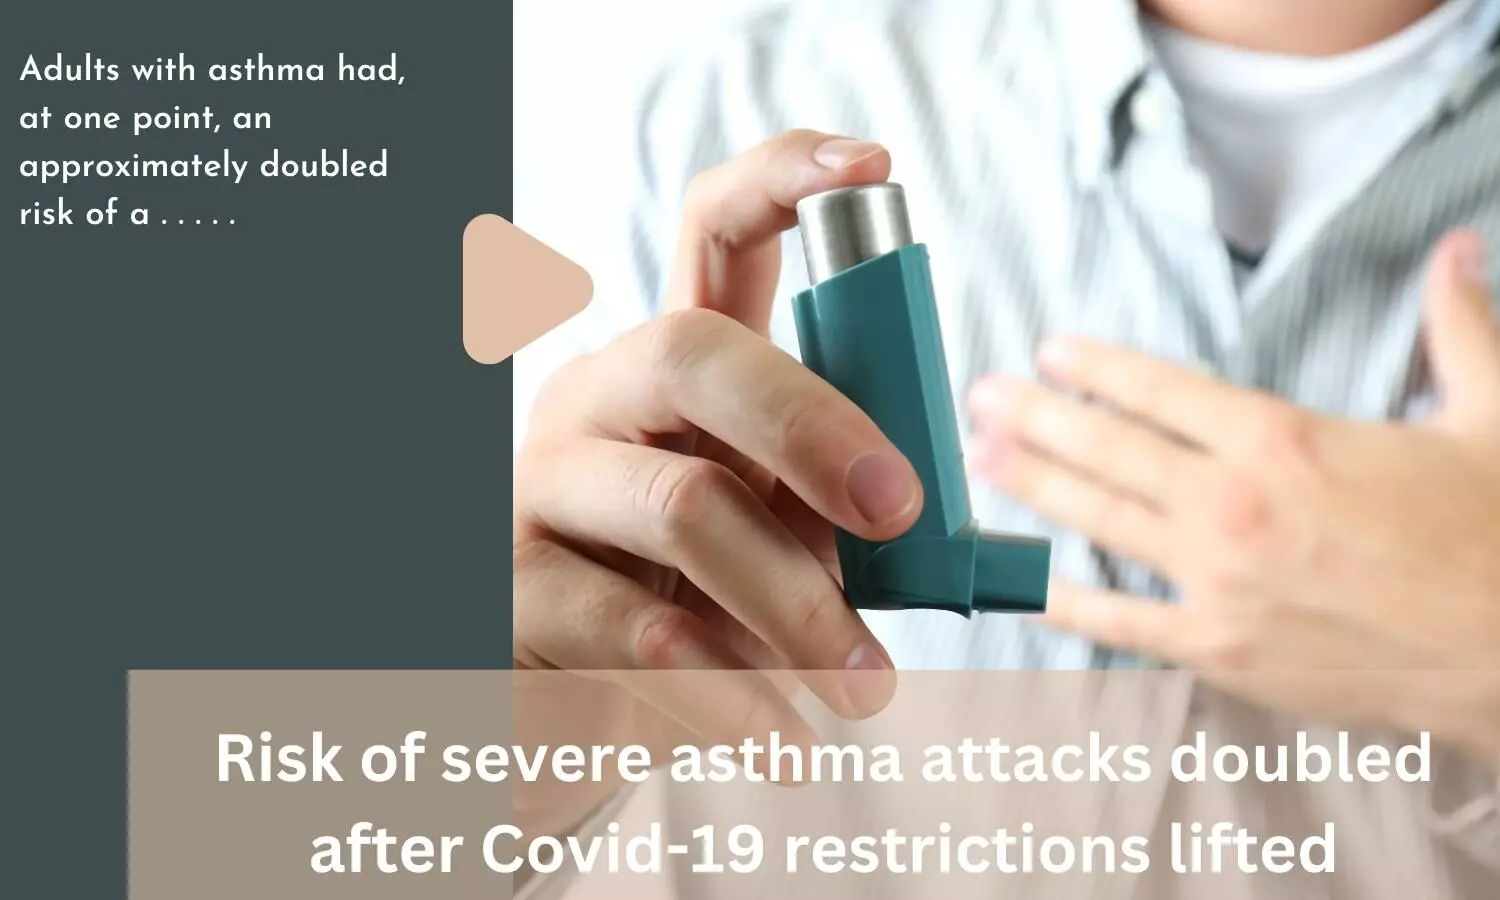 Risk of severe asthma attacks doubled after Covid-19 restrictions lifted